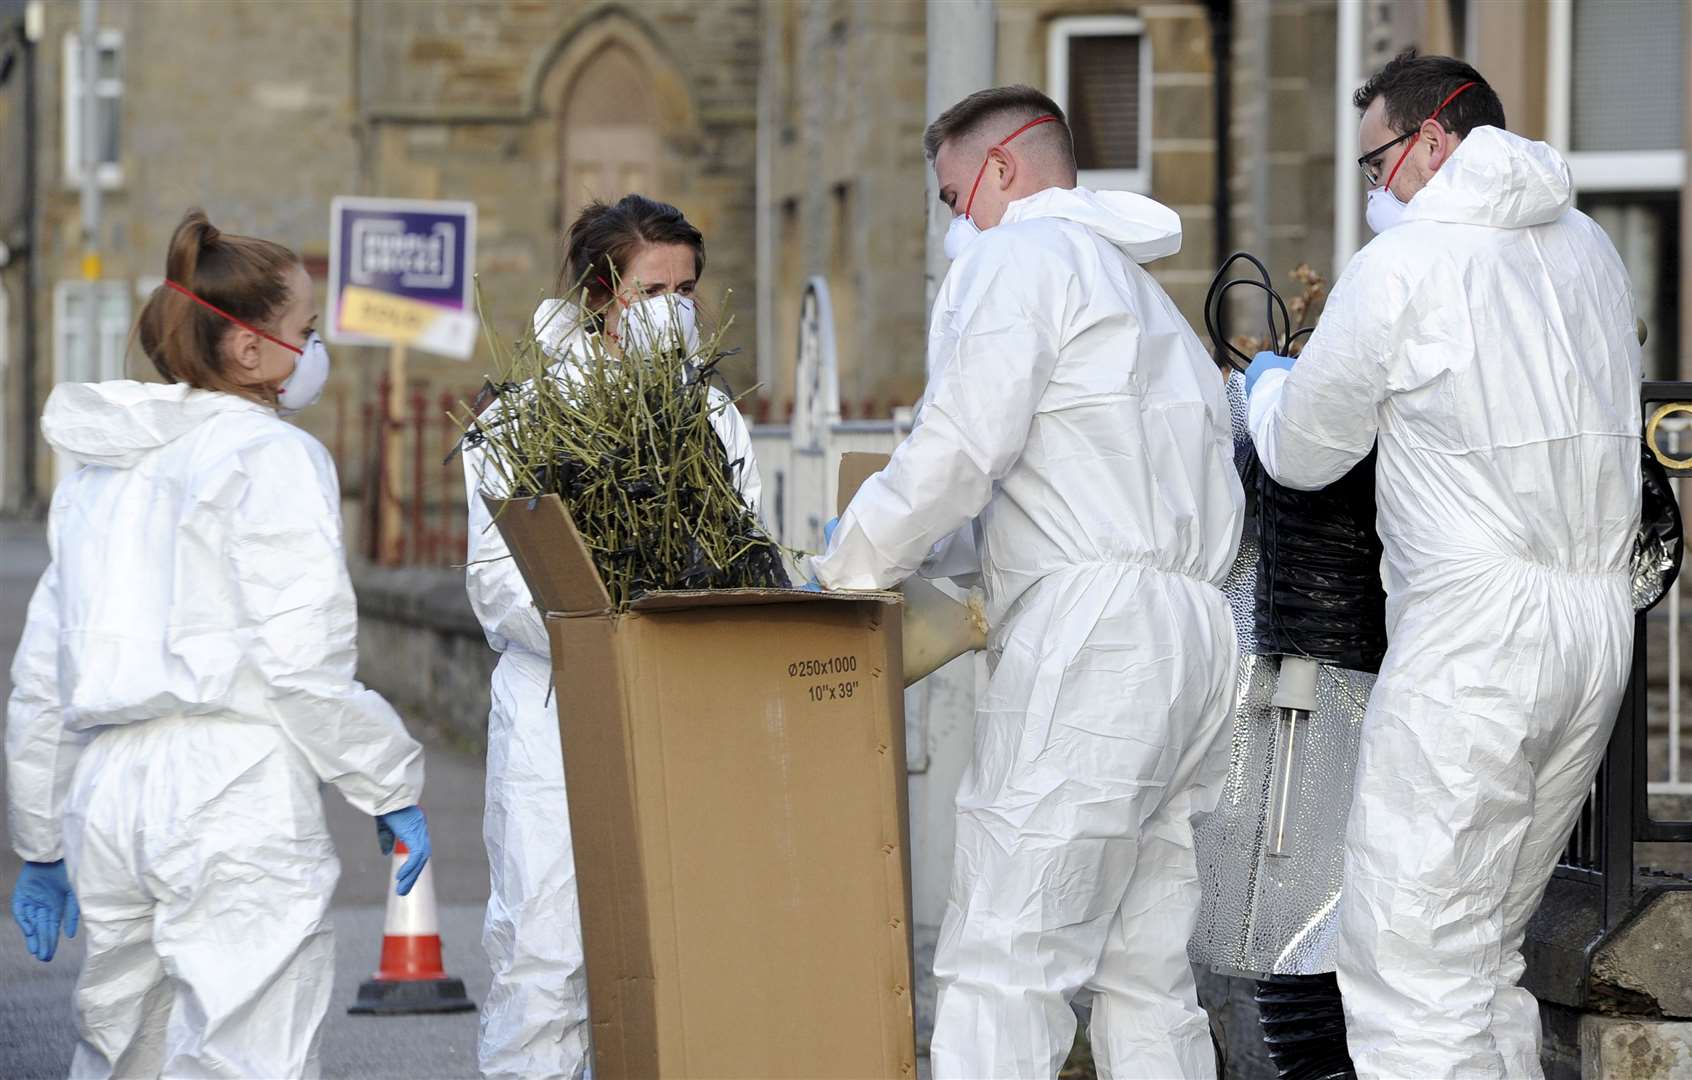 Police officers clearing out drug-making equipment.